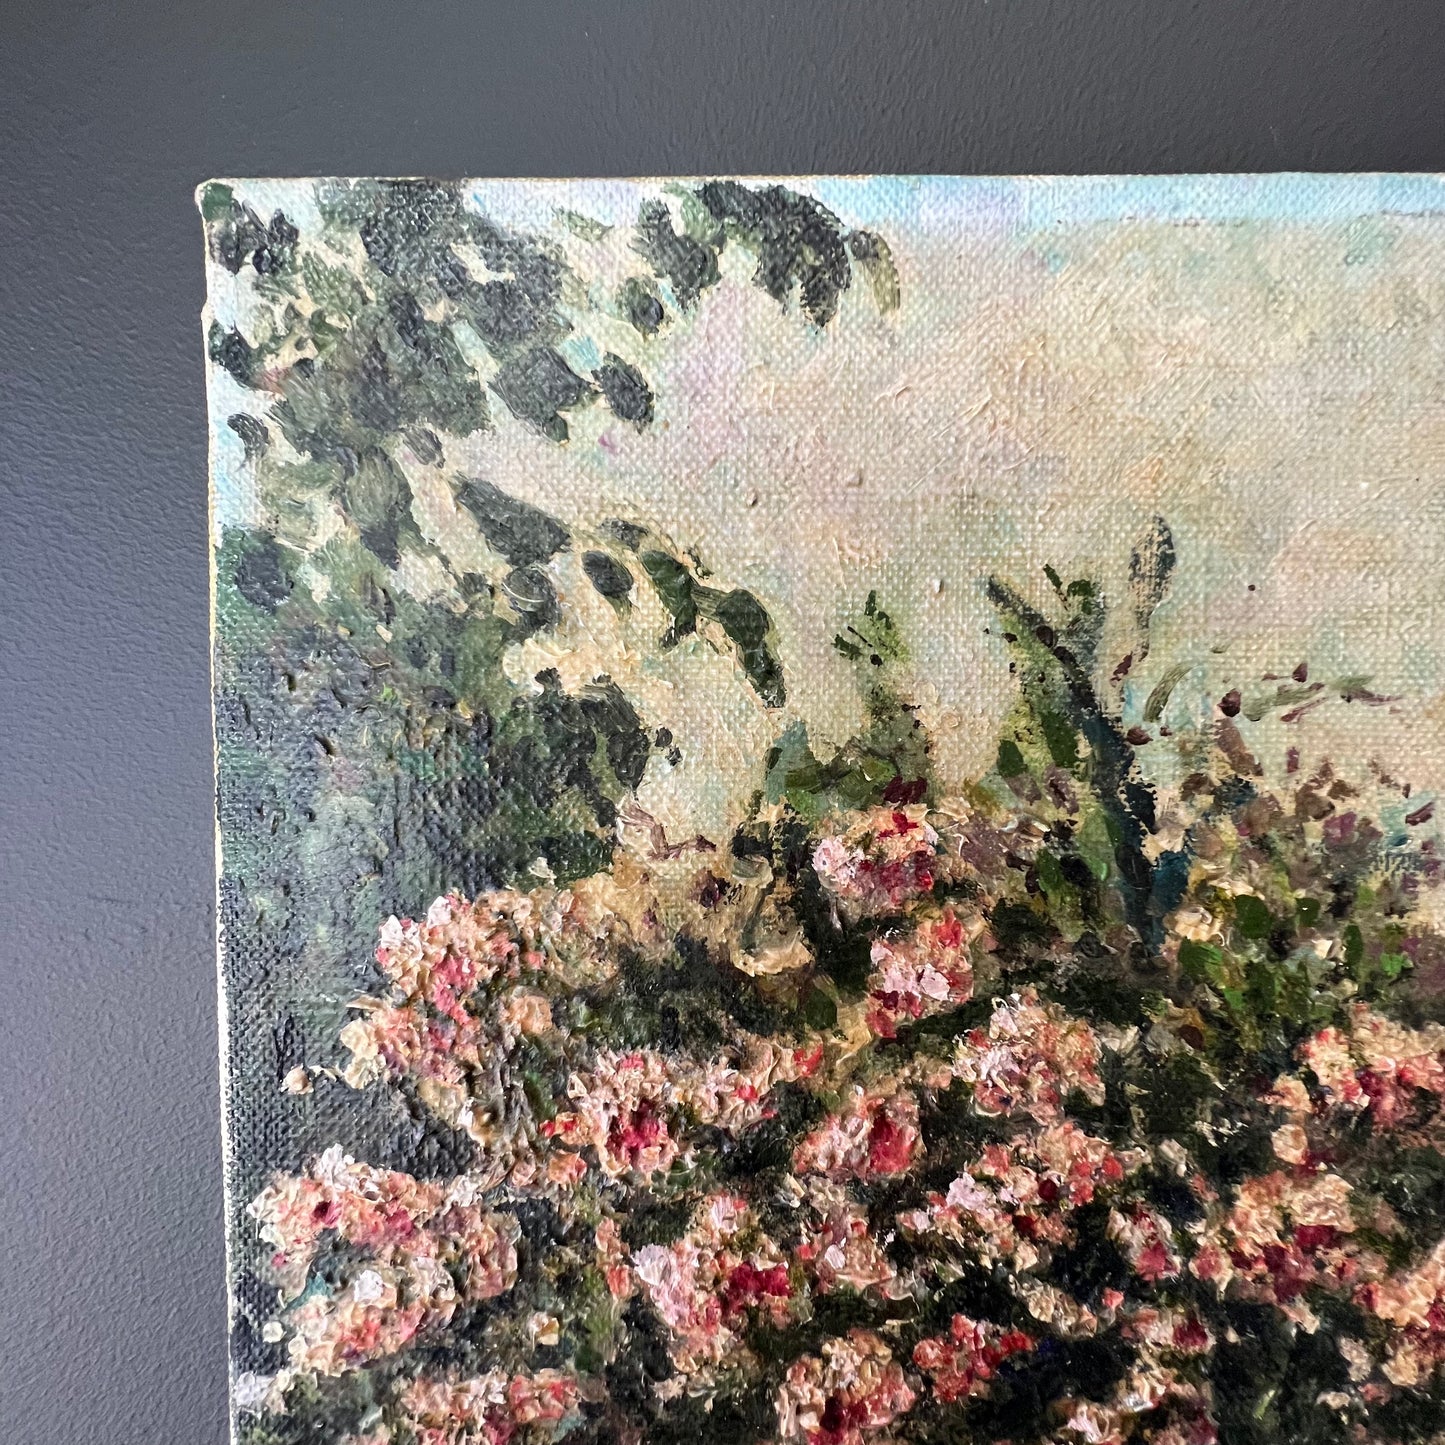 Vintage Oil Painting French Landscape The Pink Blossom Tree